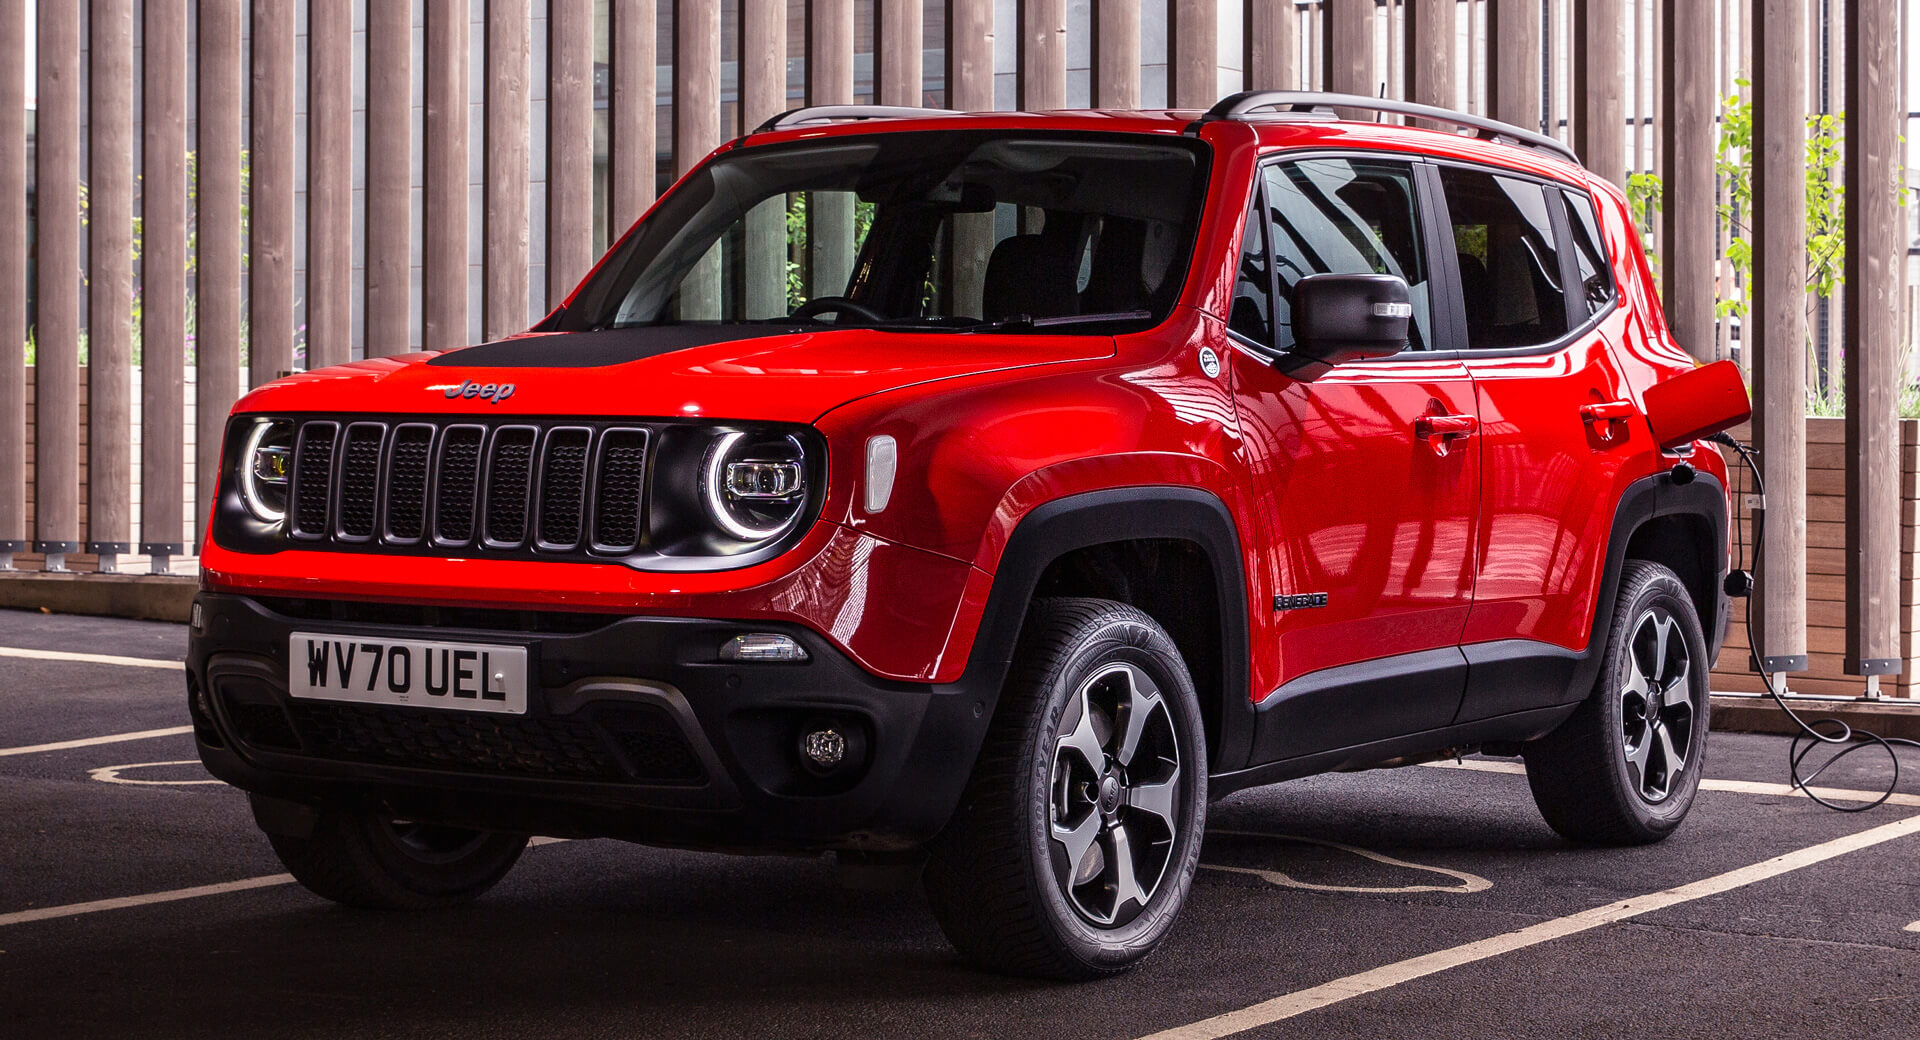 2021 Jeep Renegade Buyer's Guide